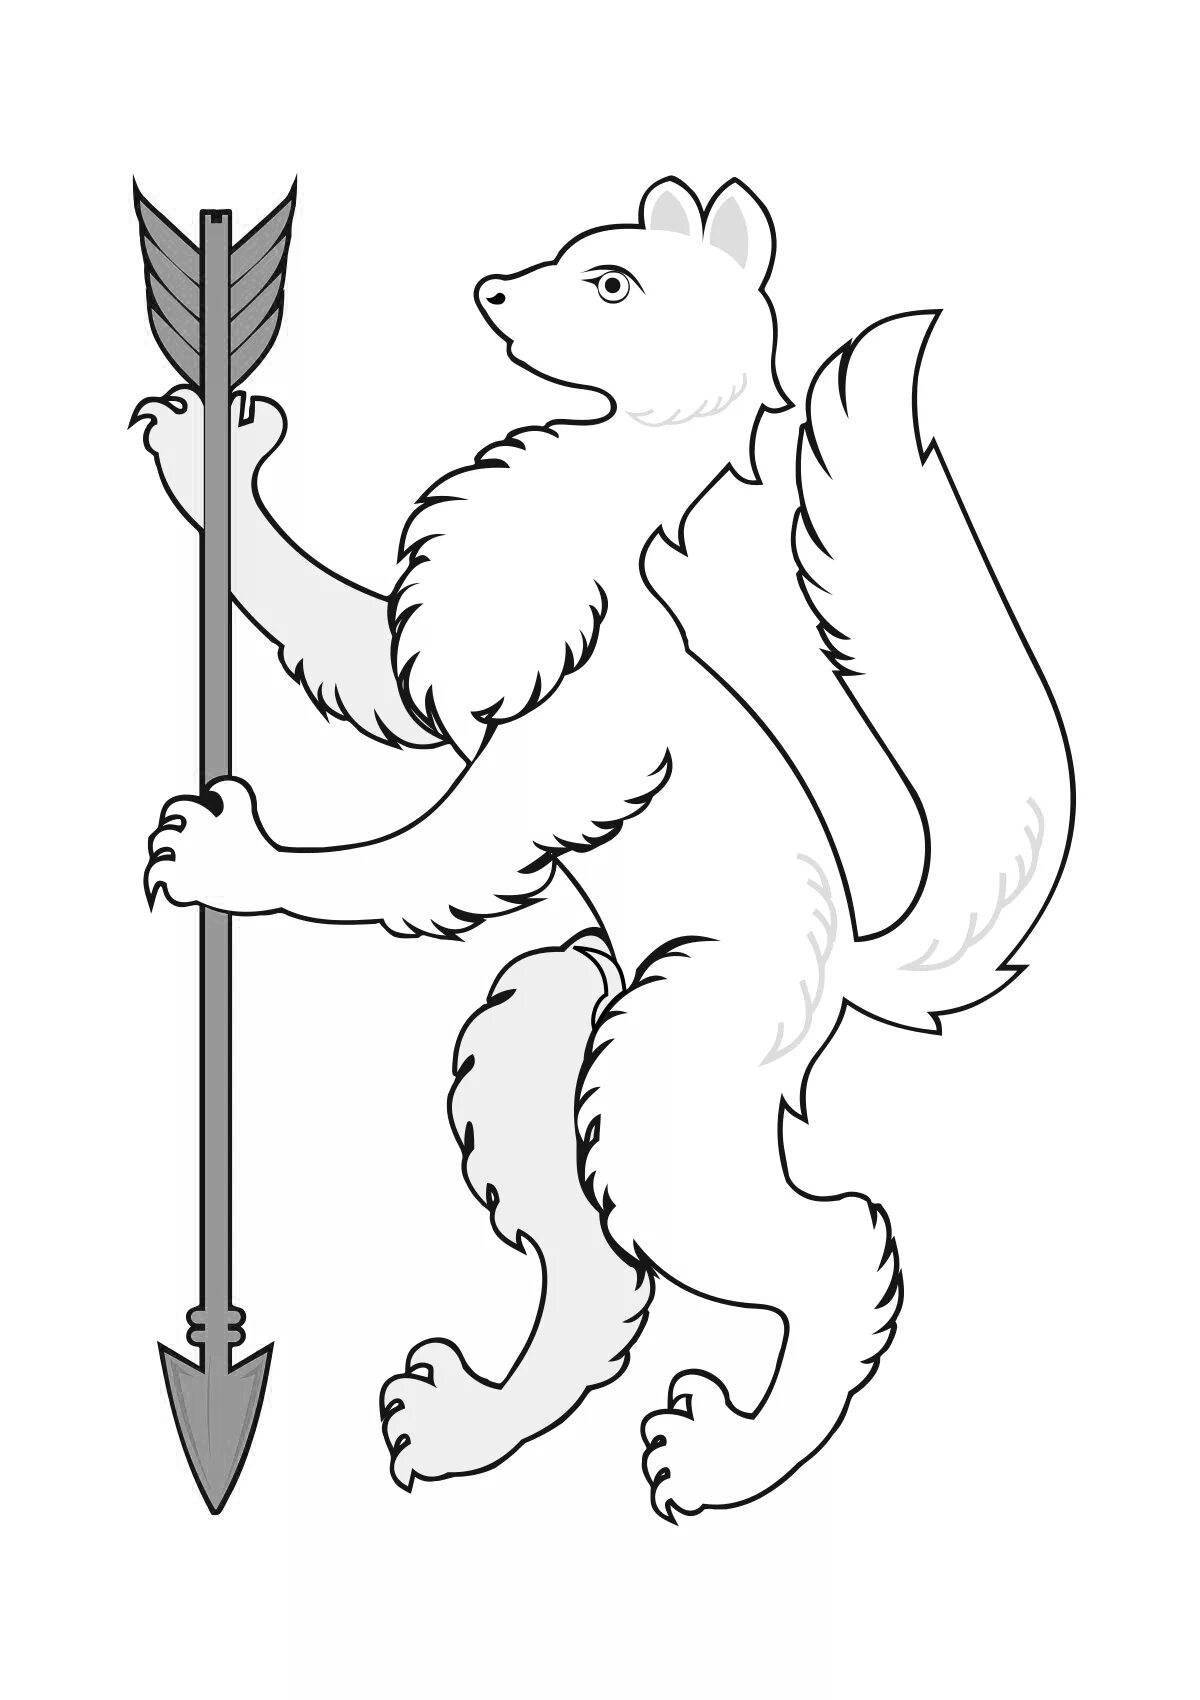 Coloring page decorated coat of arms of Yekaterinburg